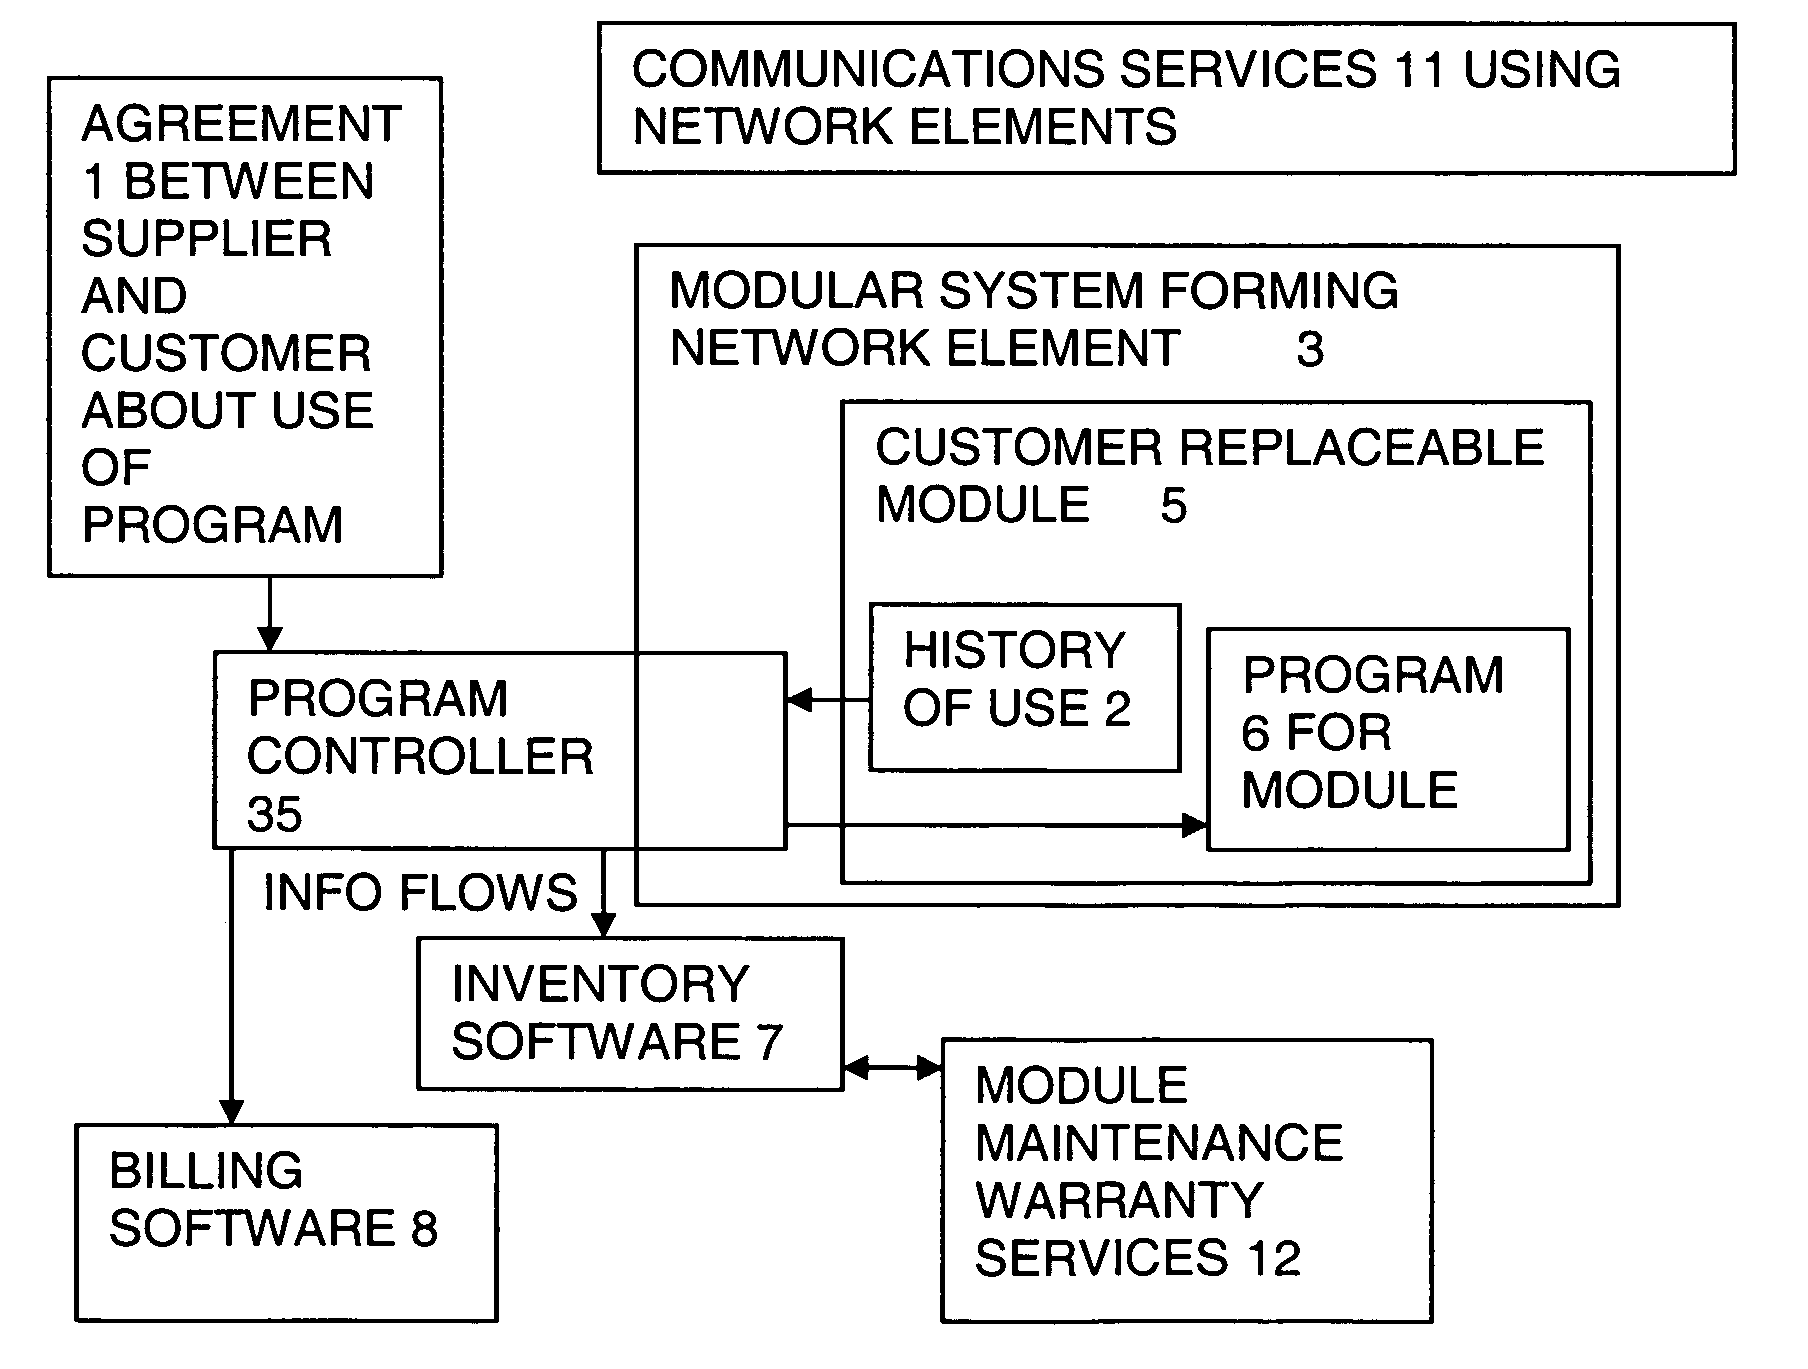 Software configuration of module dependent on history